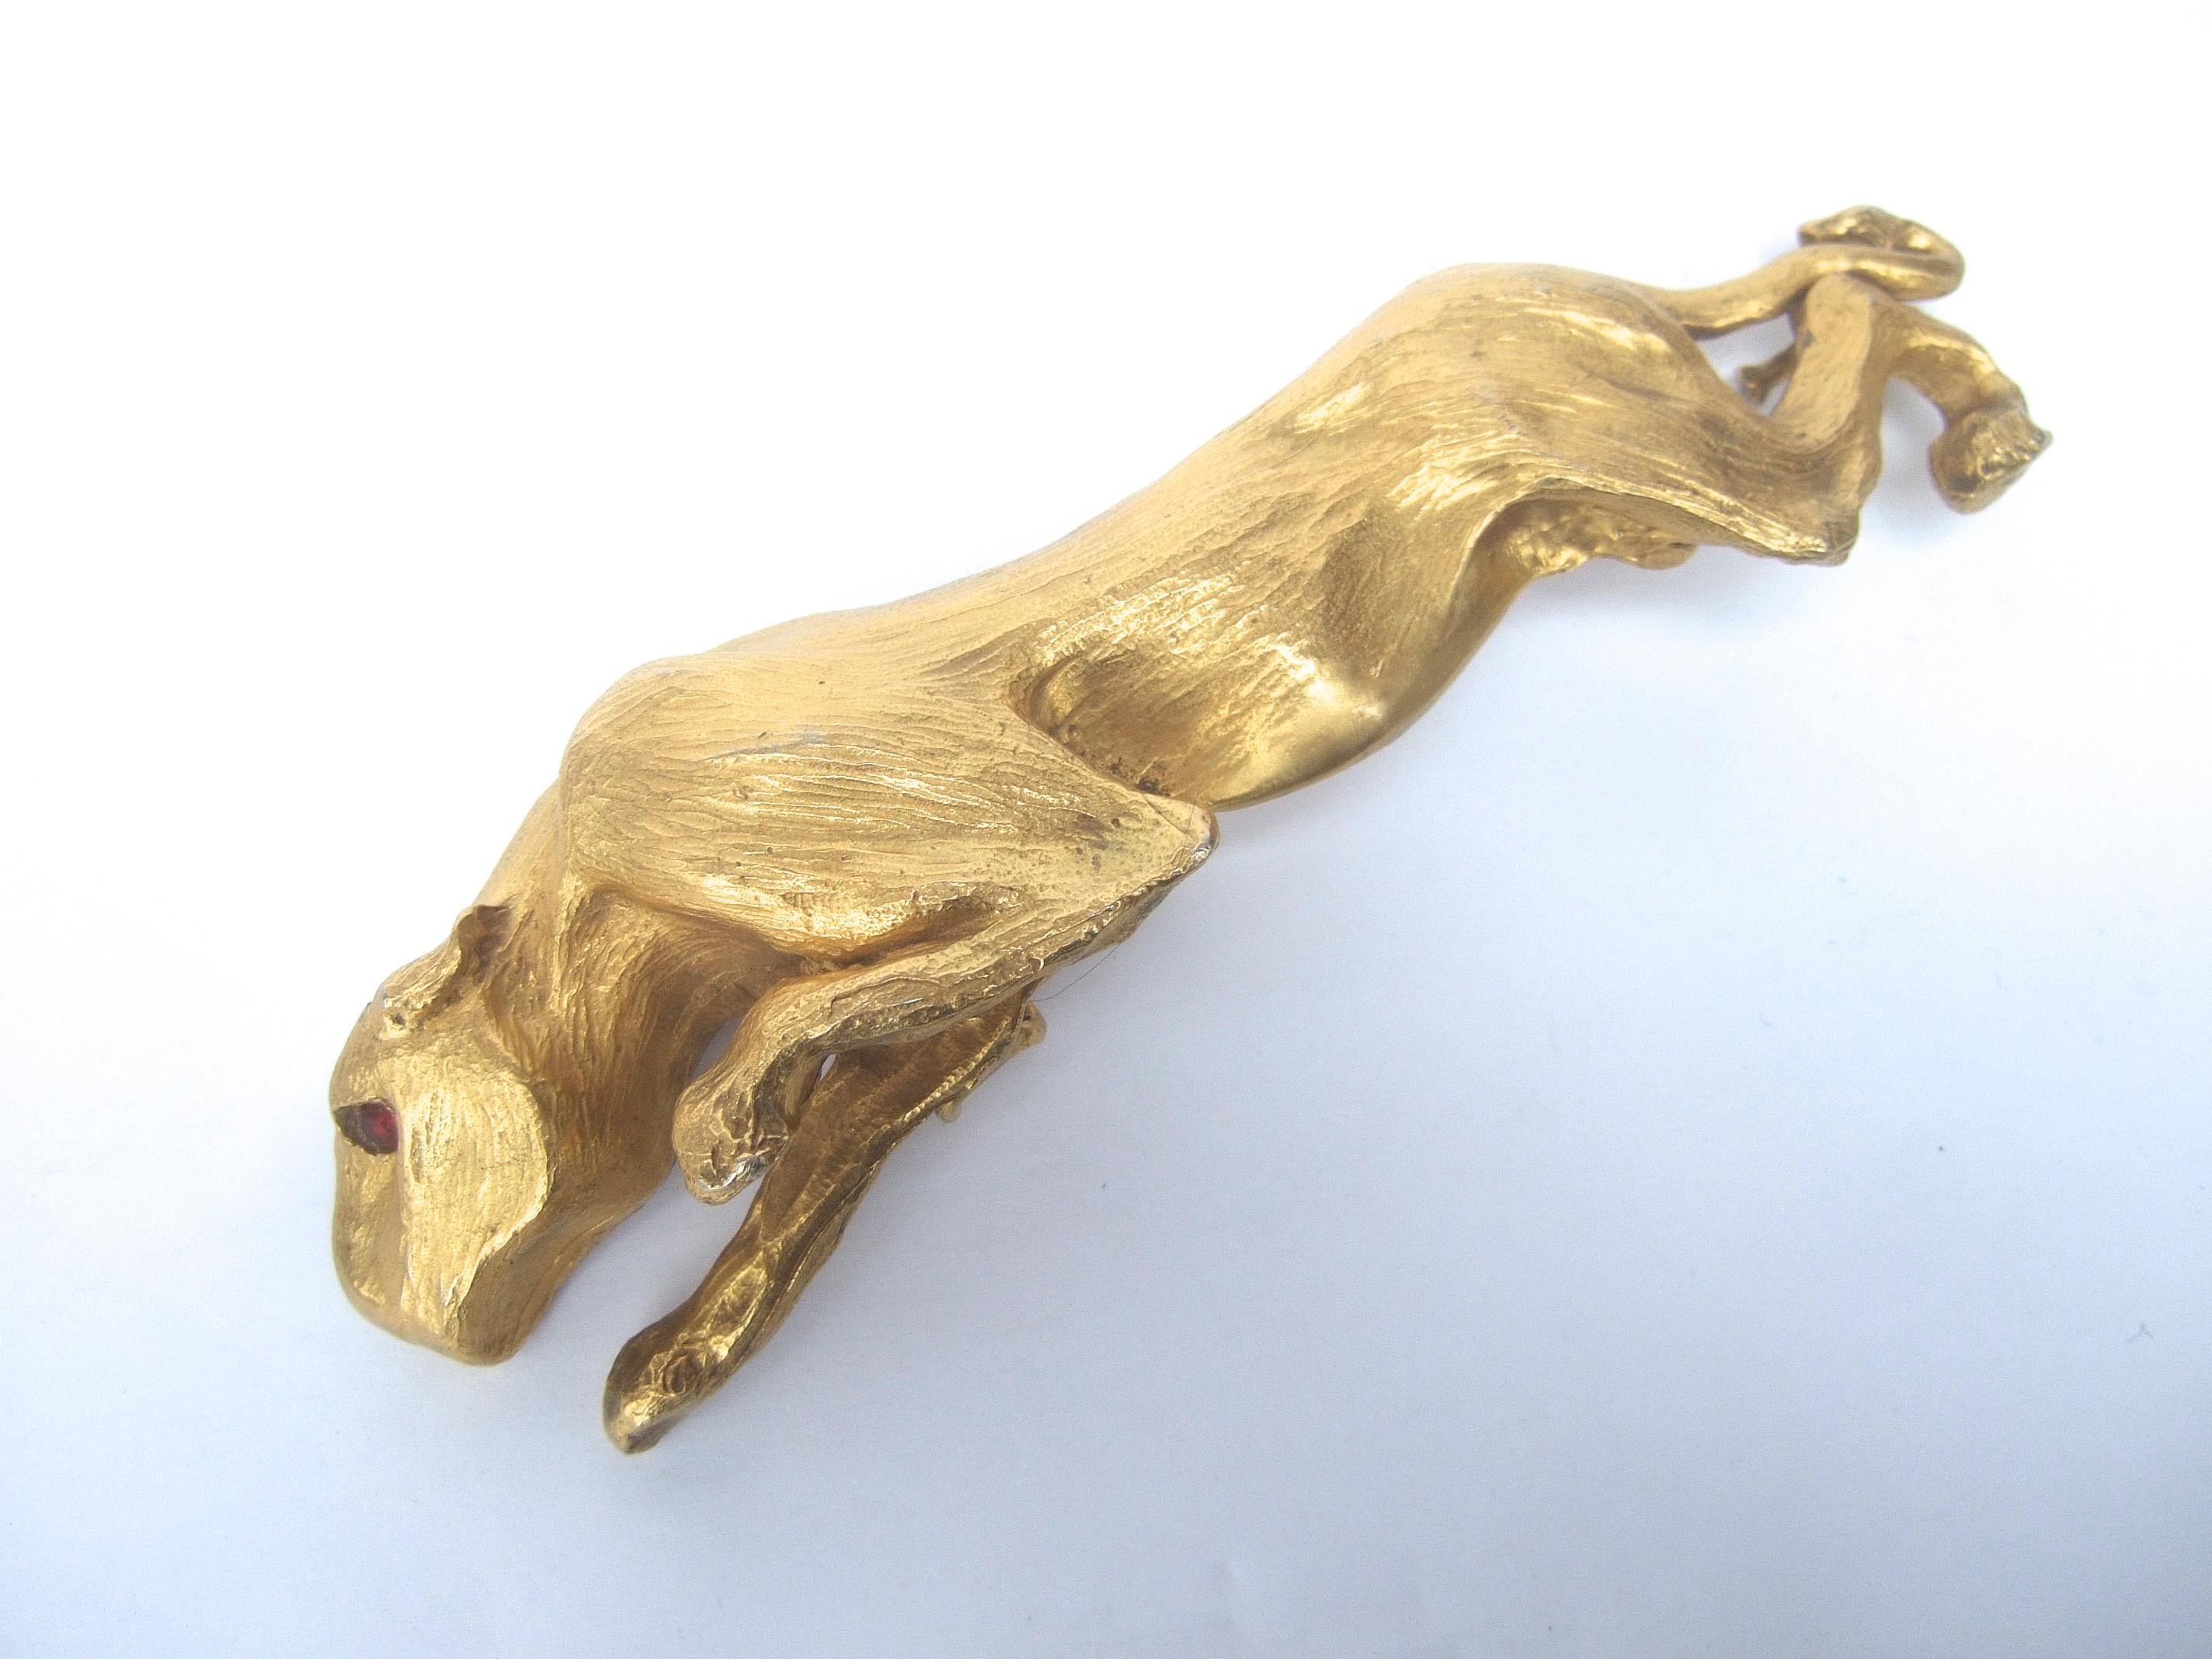 Christopher Ross 24k Gold Plated Panther Belt Buckle circa 1976  4